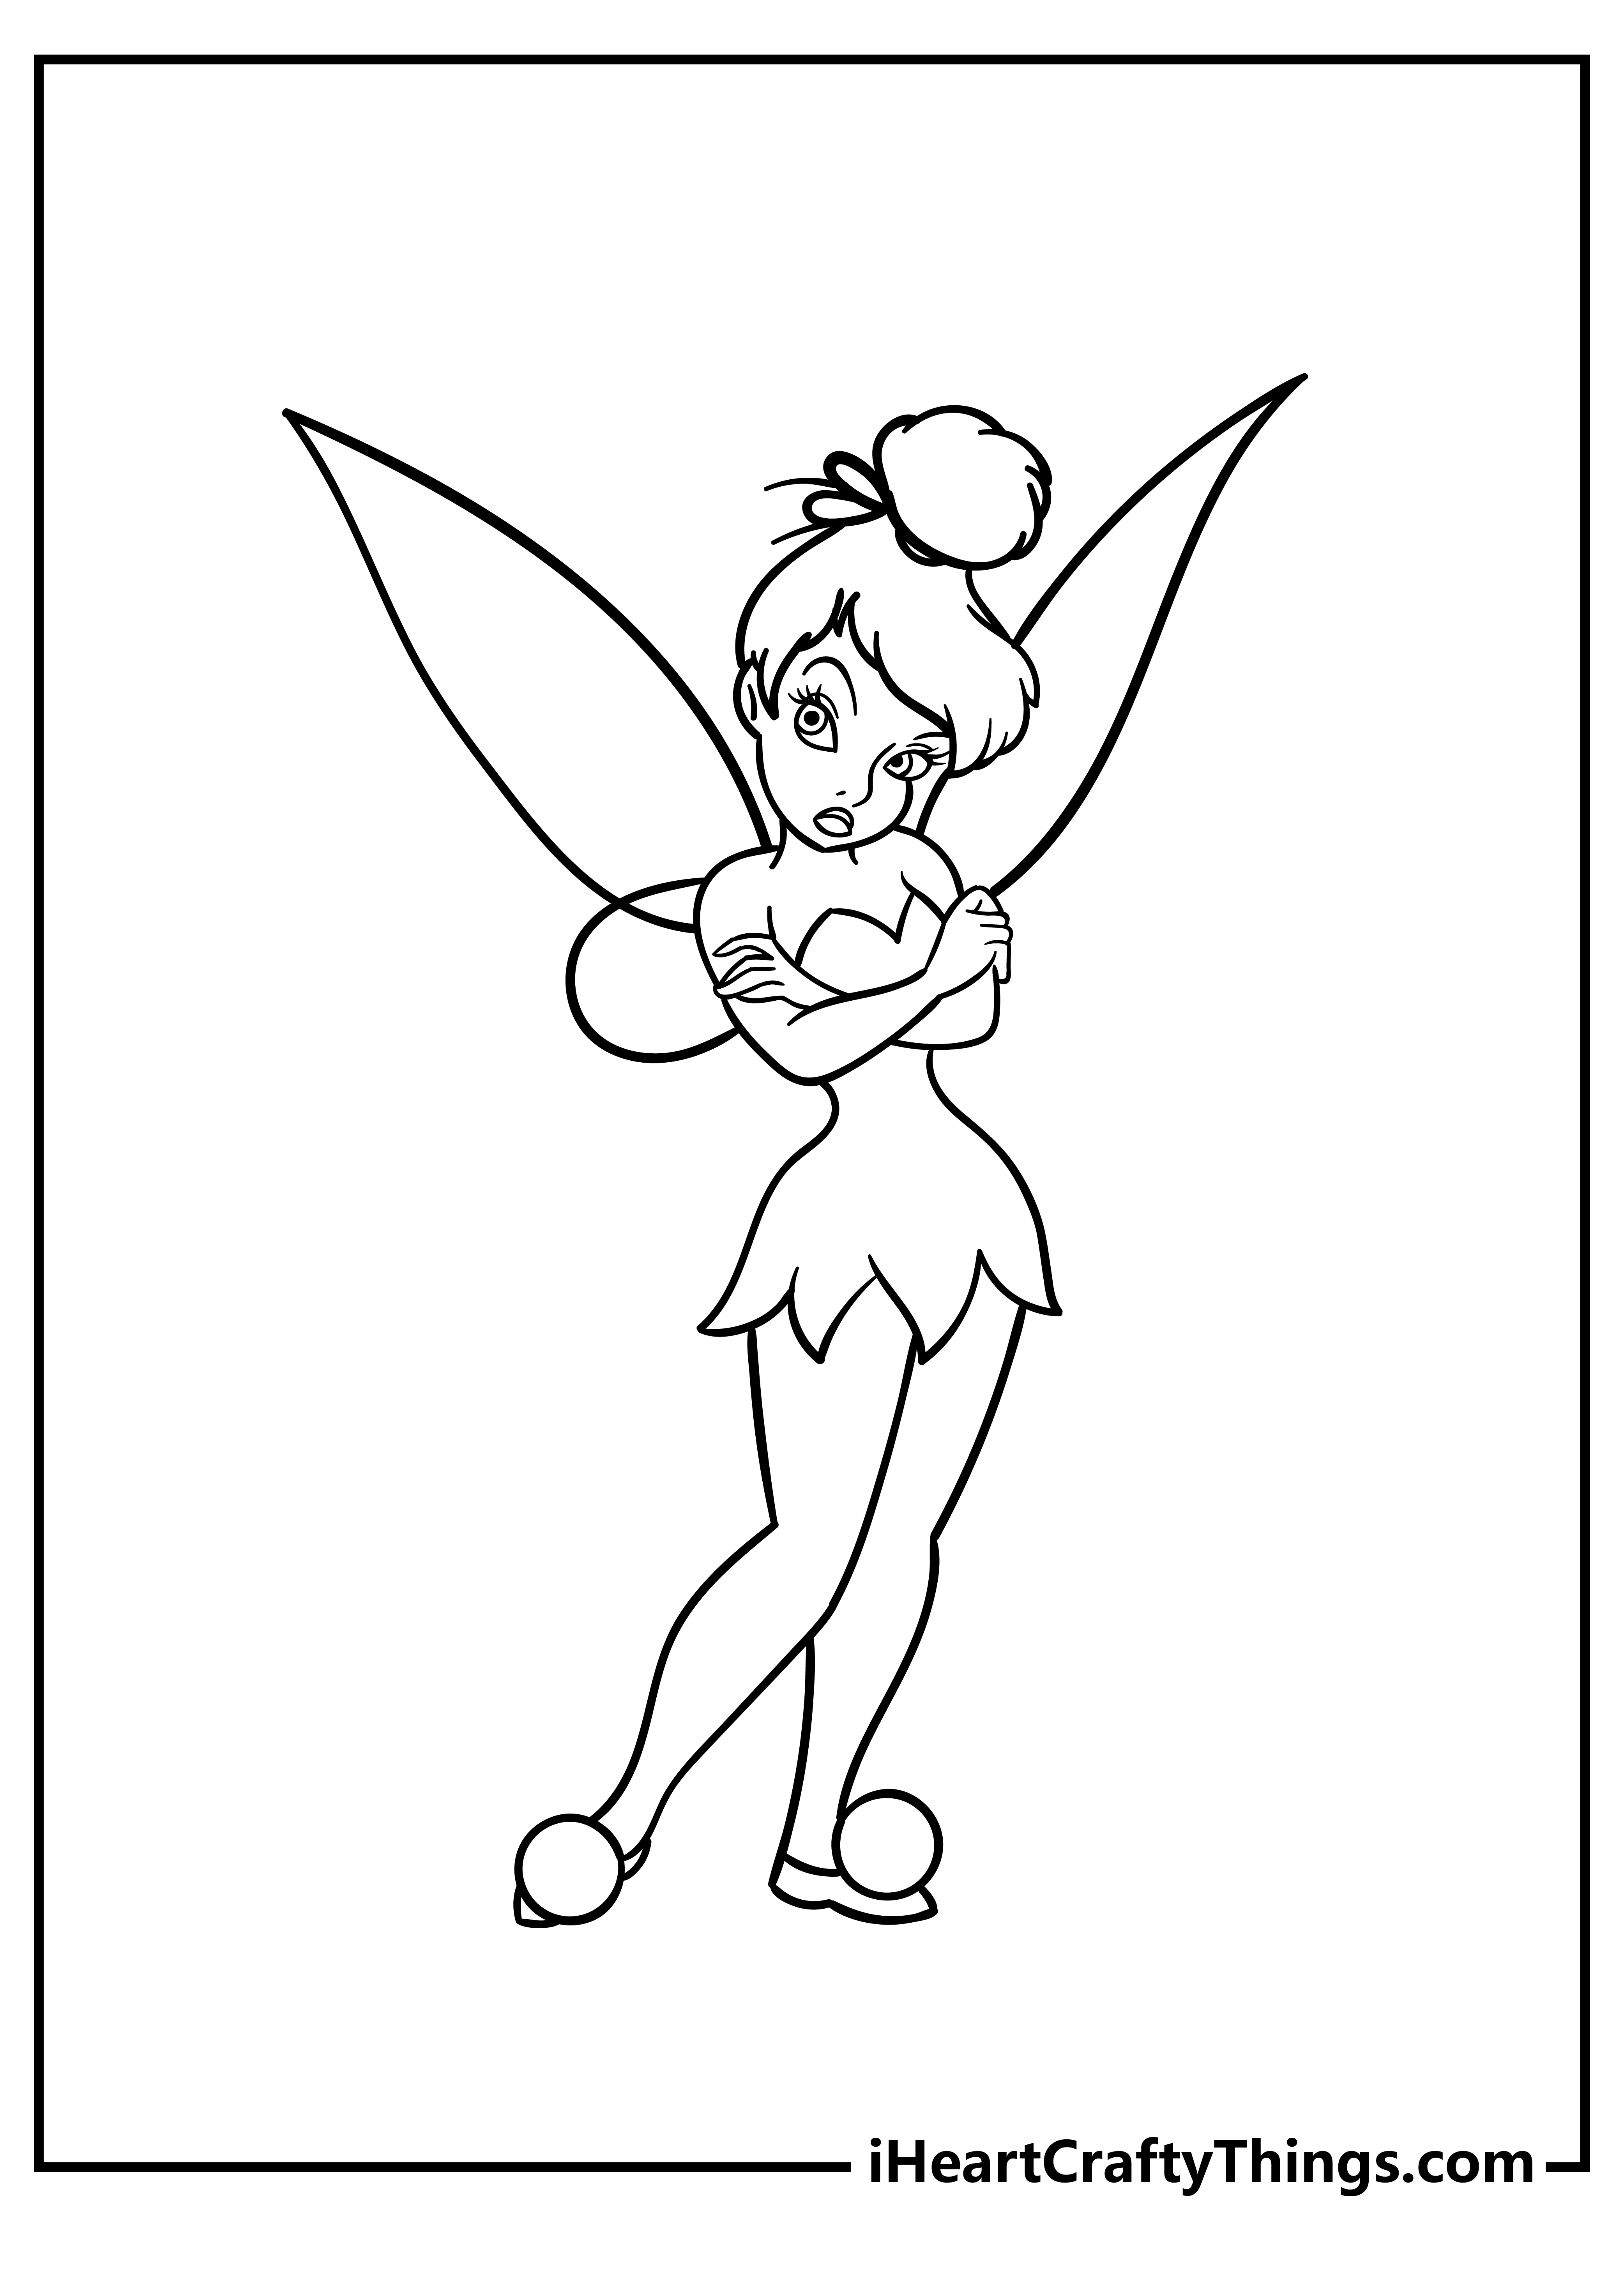 Tinkerbell Coloring Pages for kids free download